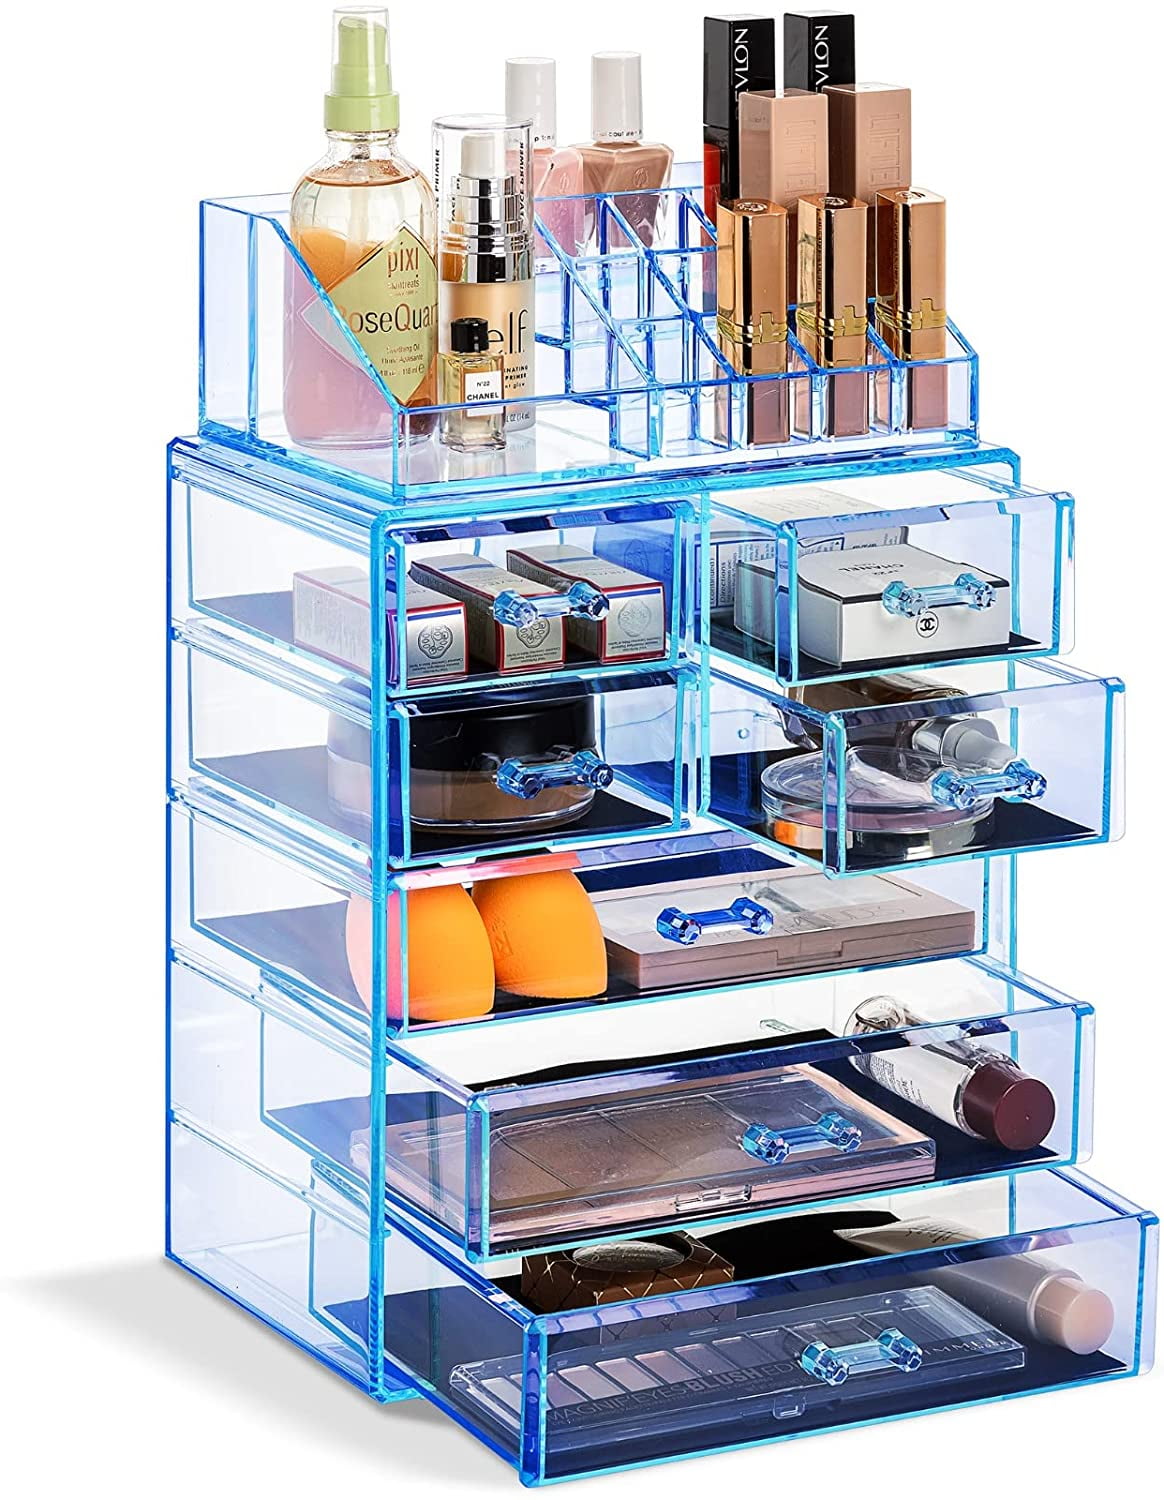 Acrylic Makeup Organizer - Cosmetic and Jewelry Storage Case Display 2-Piece Women's Accessories Set with 7 Drawers and 16 Comportment Slots - Blue - Walmart.com